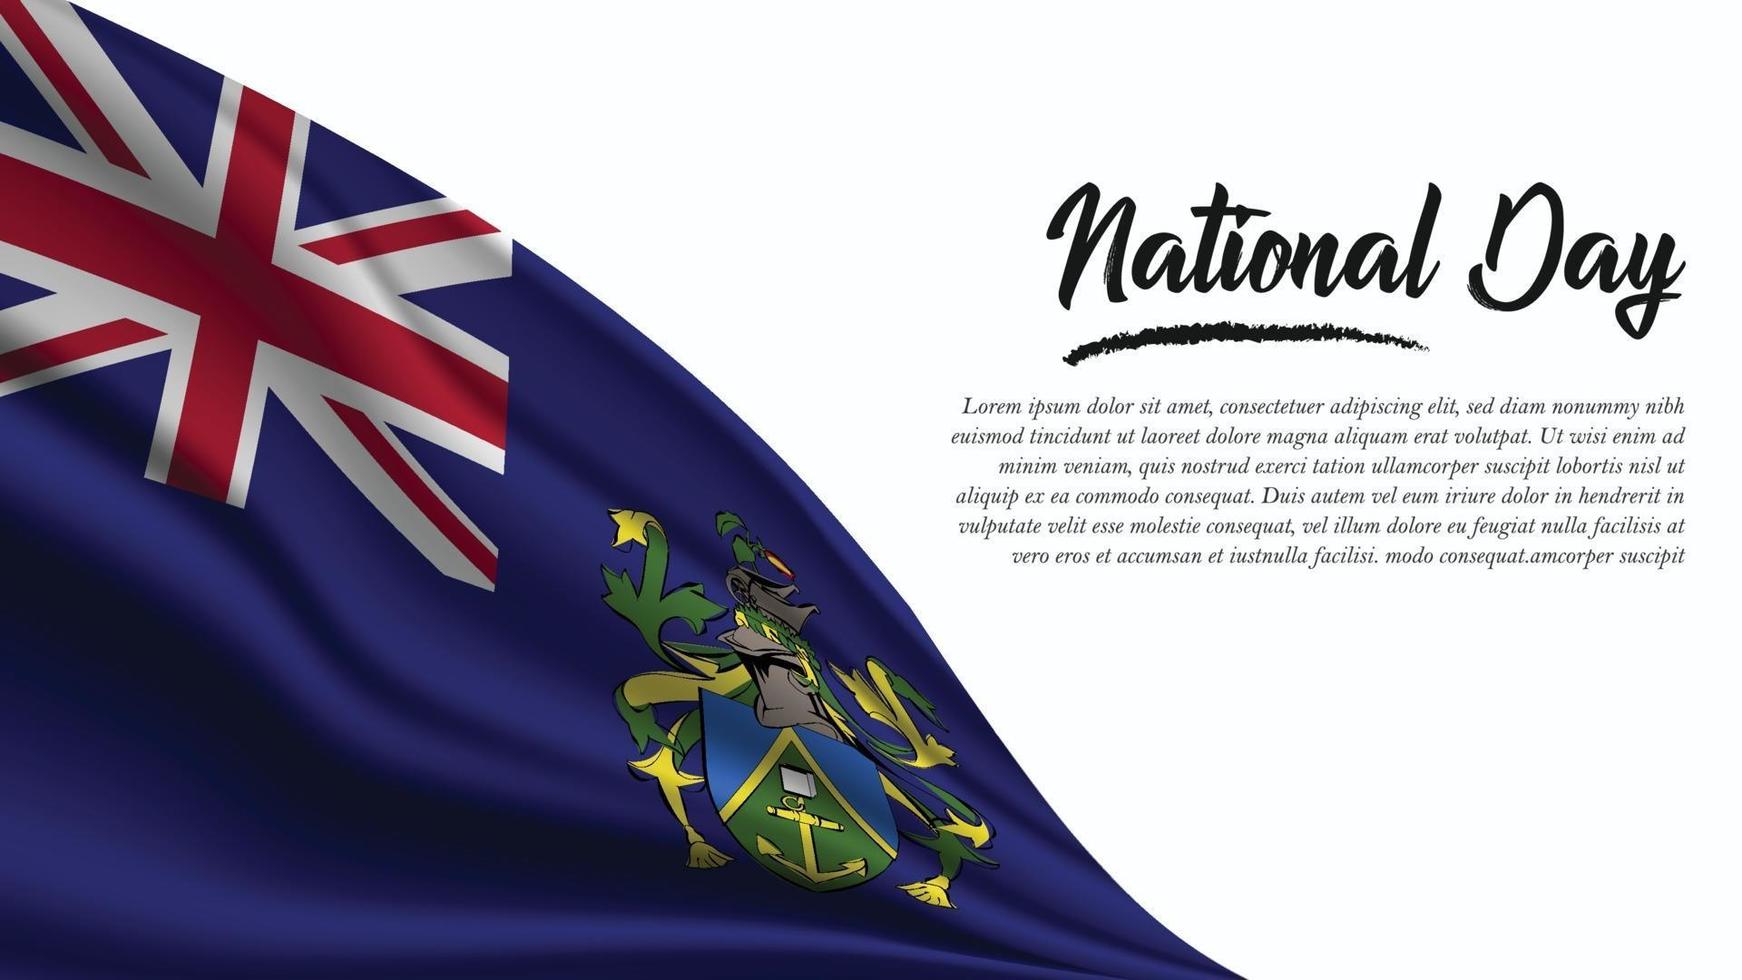 National Day Banner with Pitcairn Islands Flag background vector